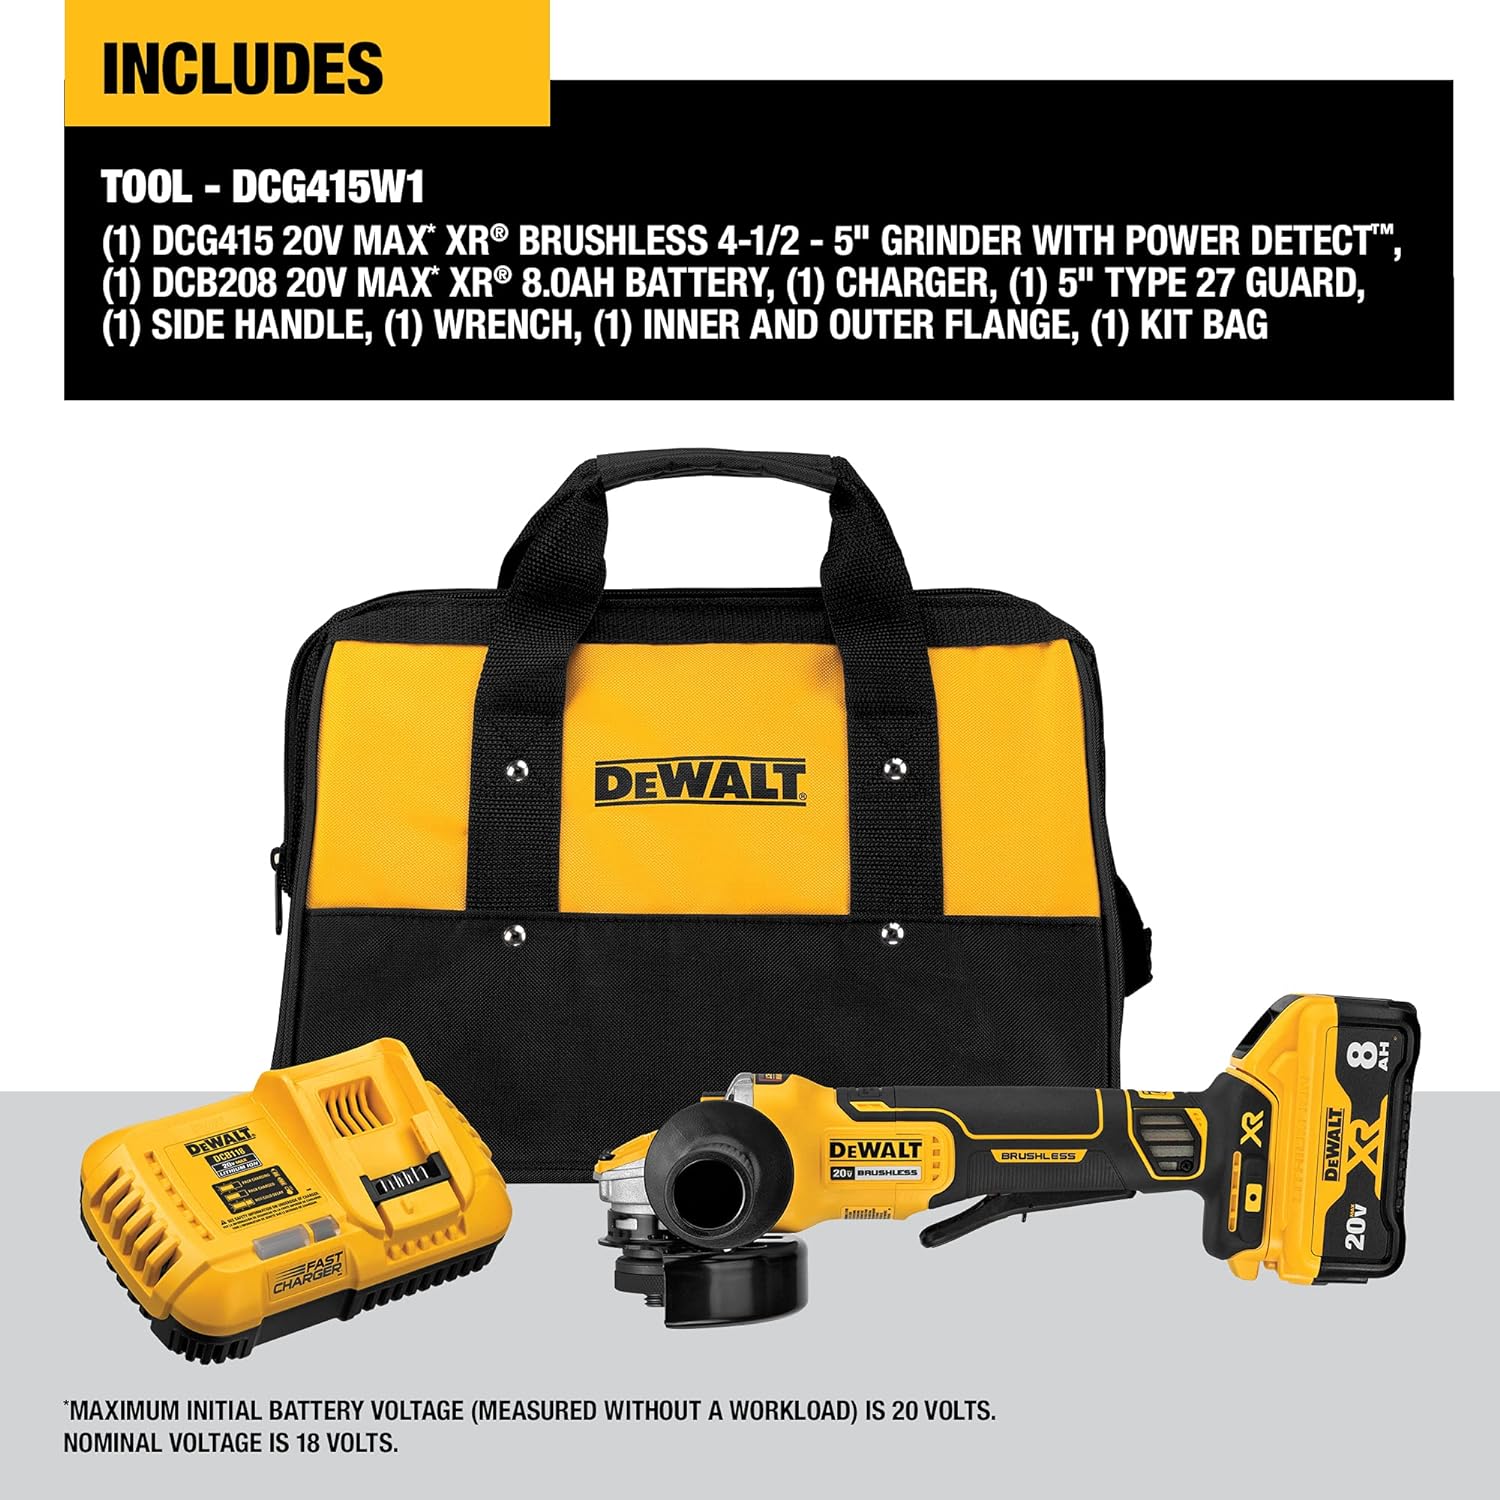 DEWALT 20V MAX* XR Angle Grinder, Trigger Switch, Power Detect Tool Technology Kit, 4-1/2-Inch to 5-Inch (DCG415W1), Grey,yellow,black